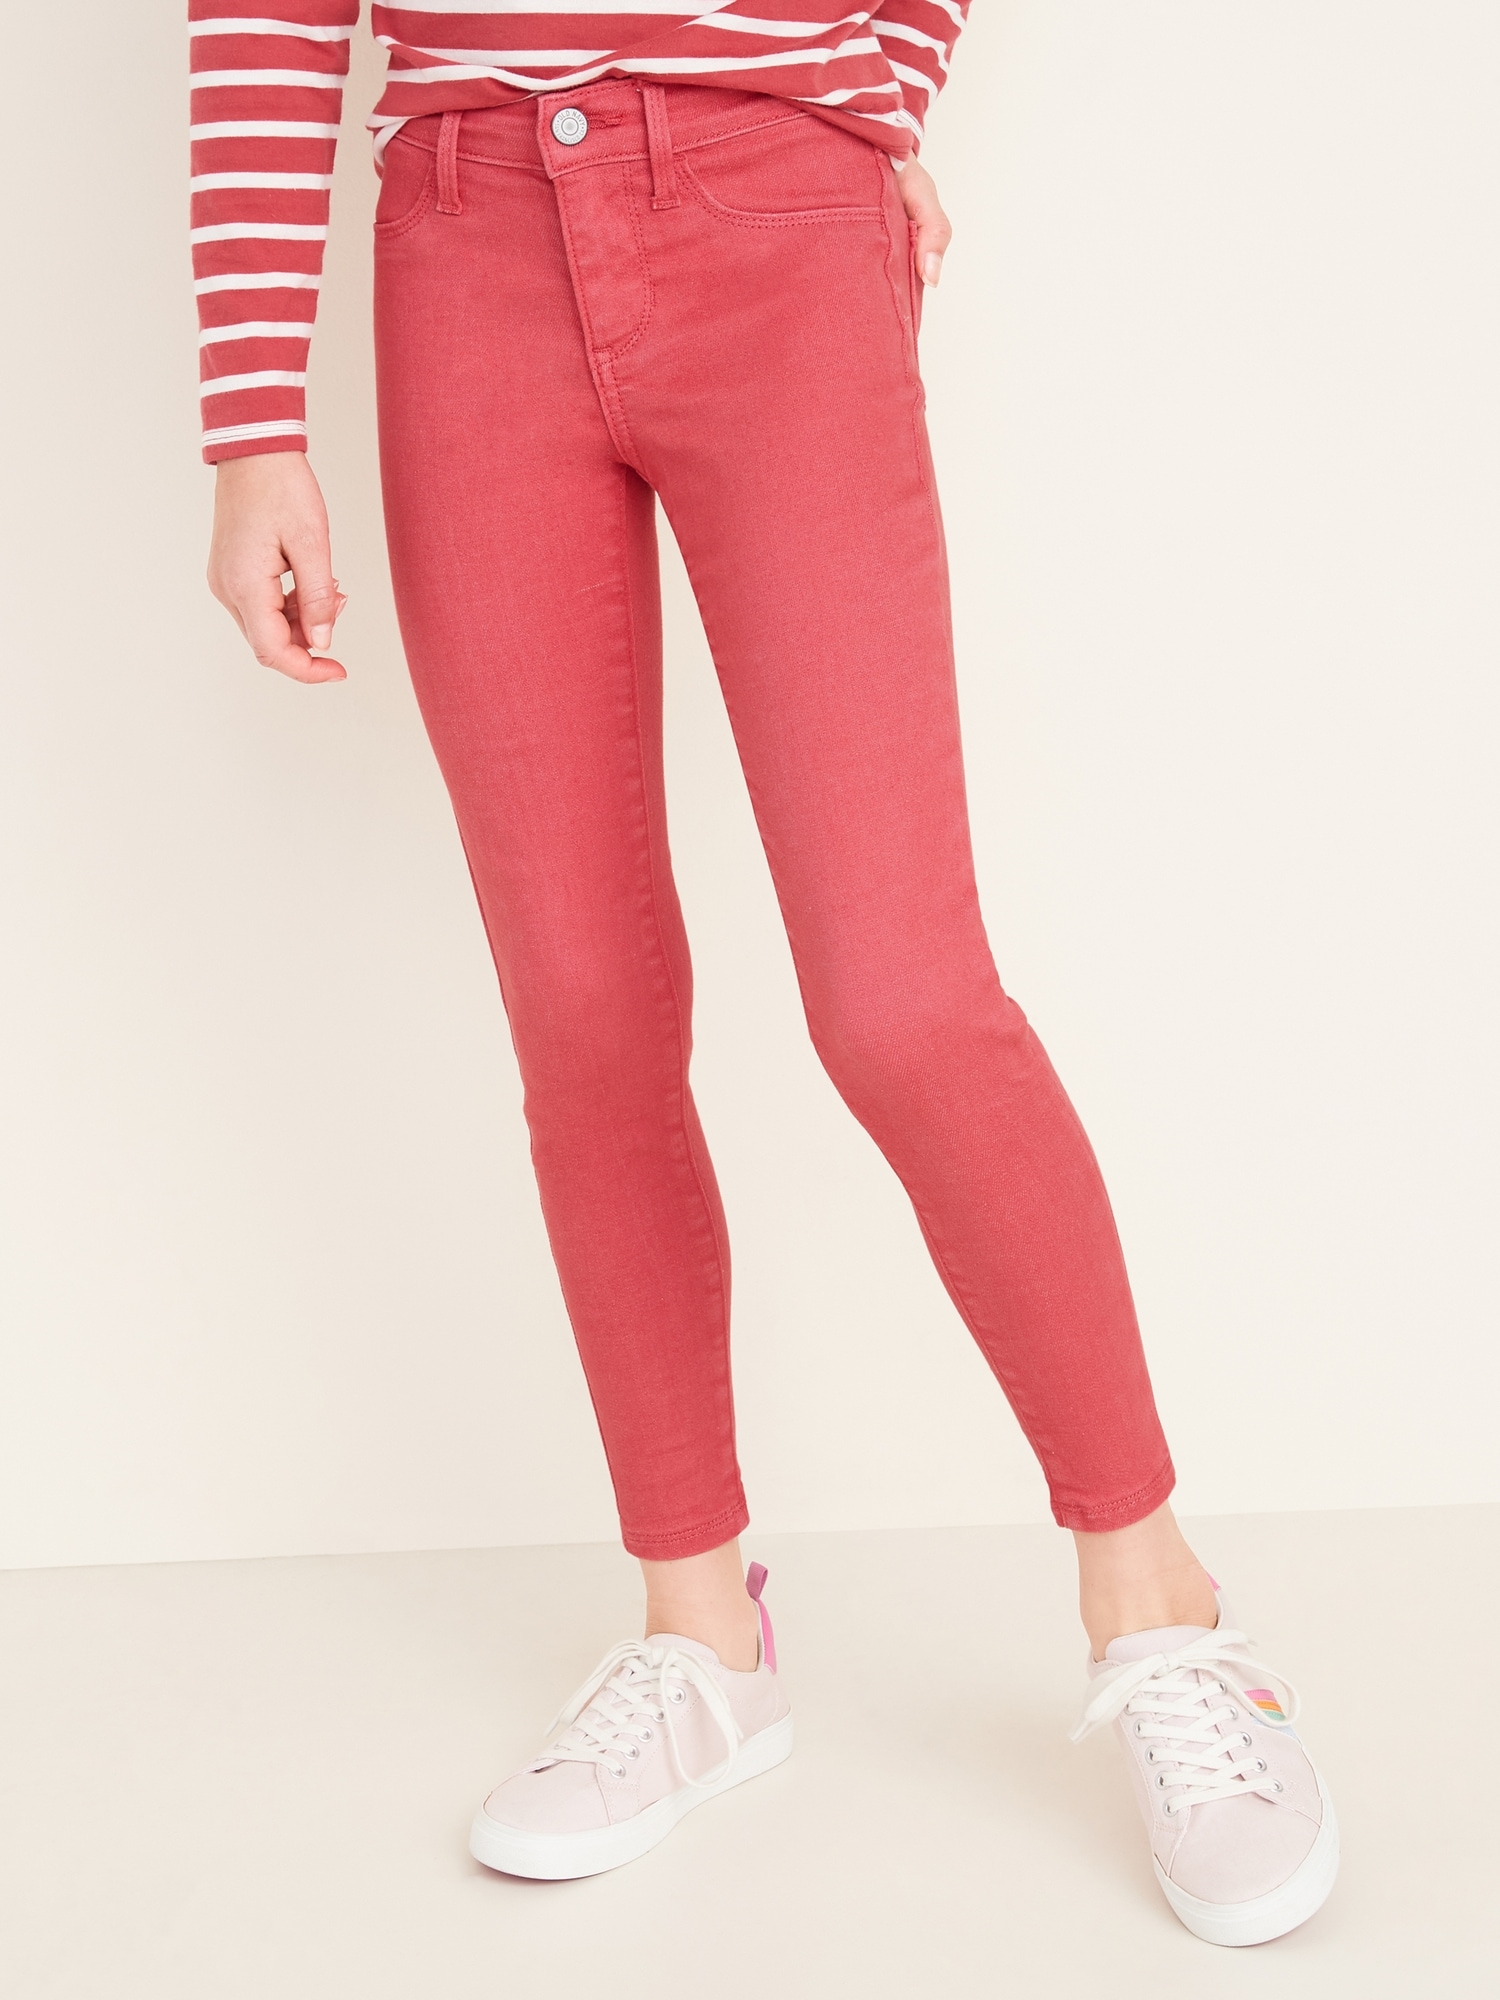 Women's Colored Jeggings